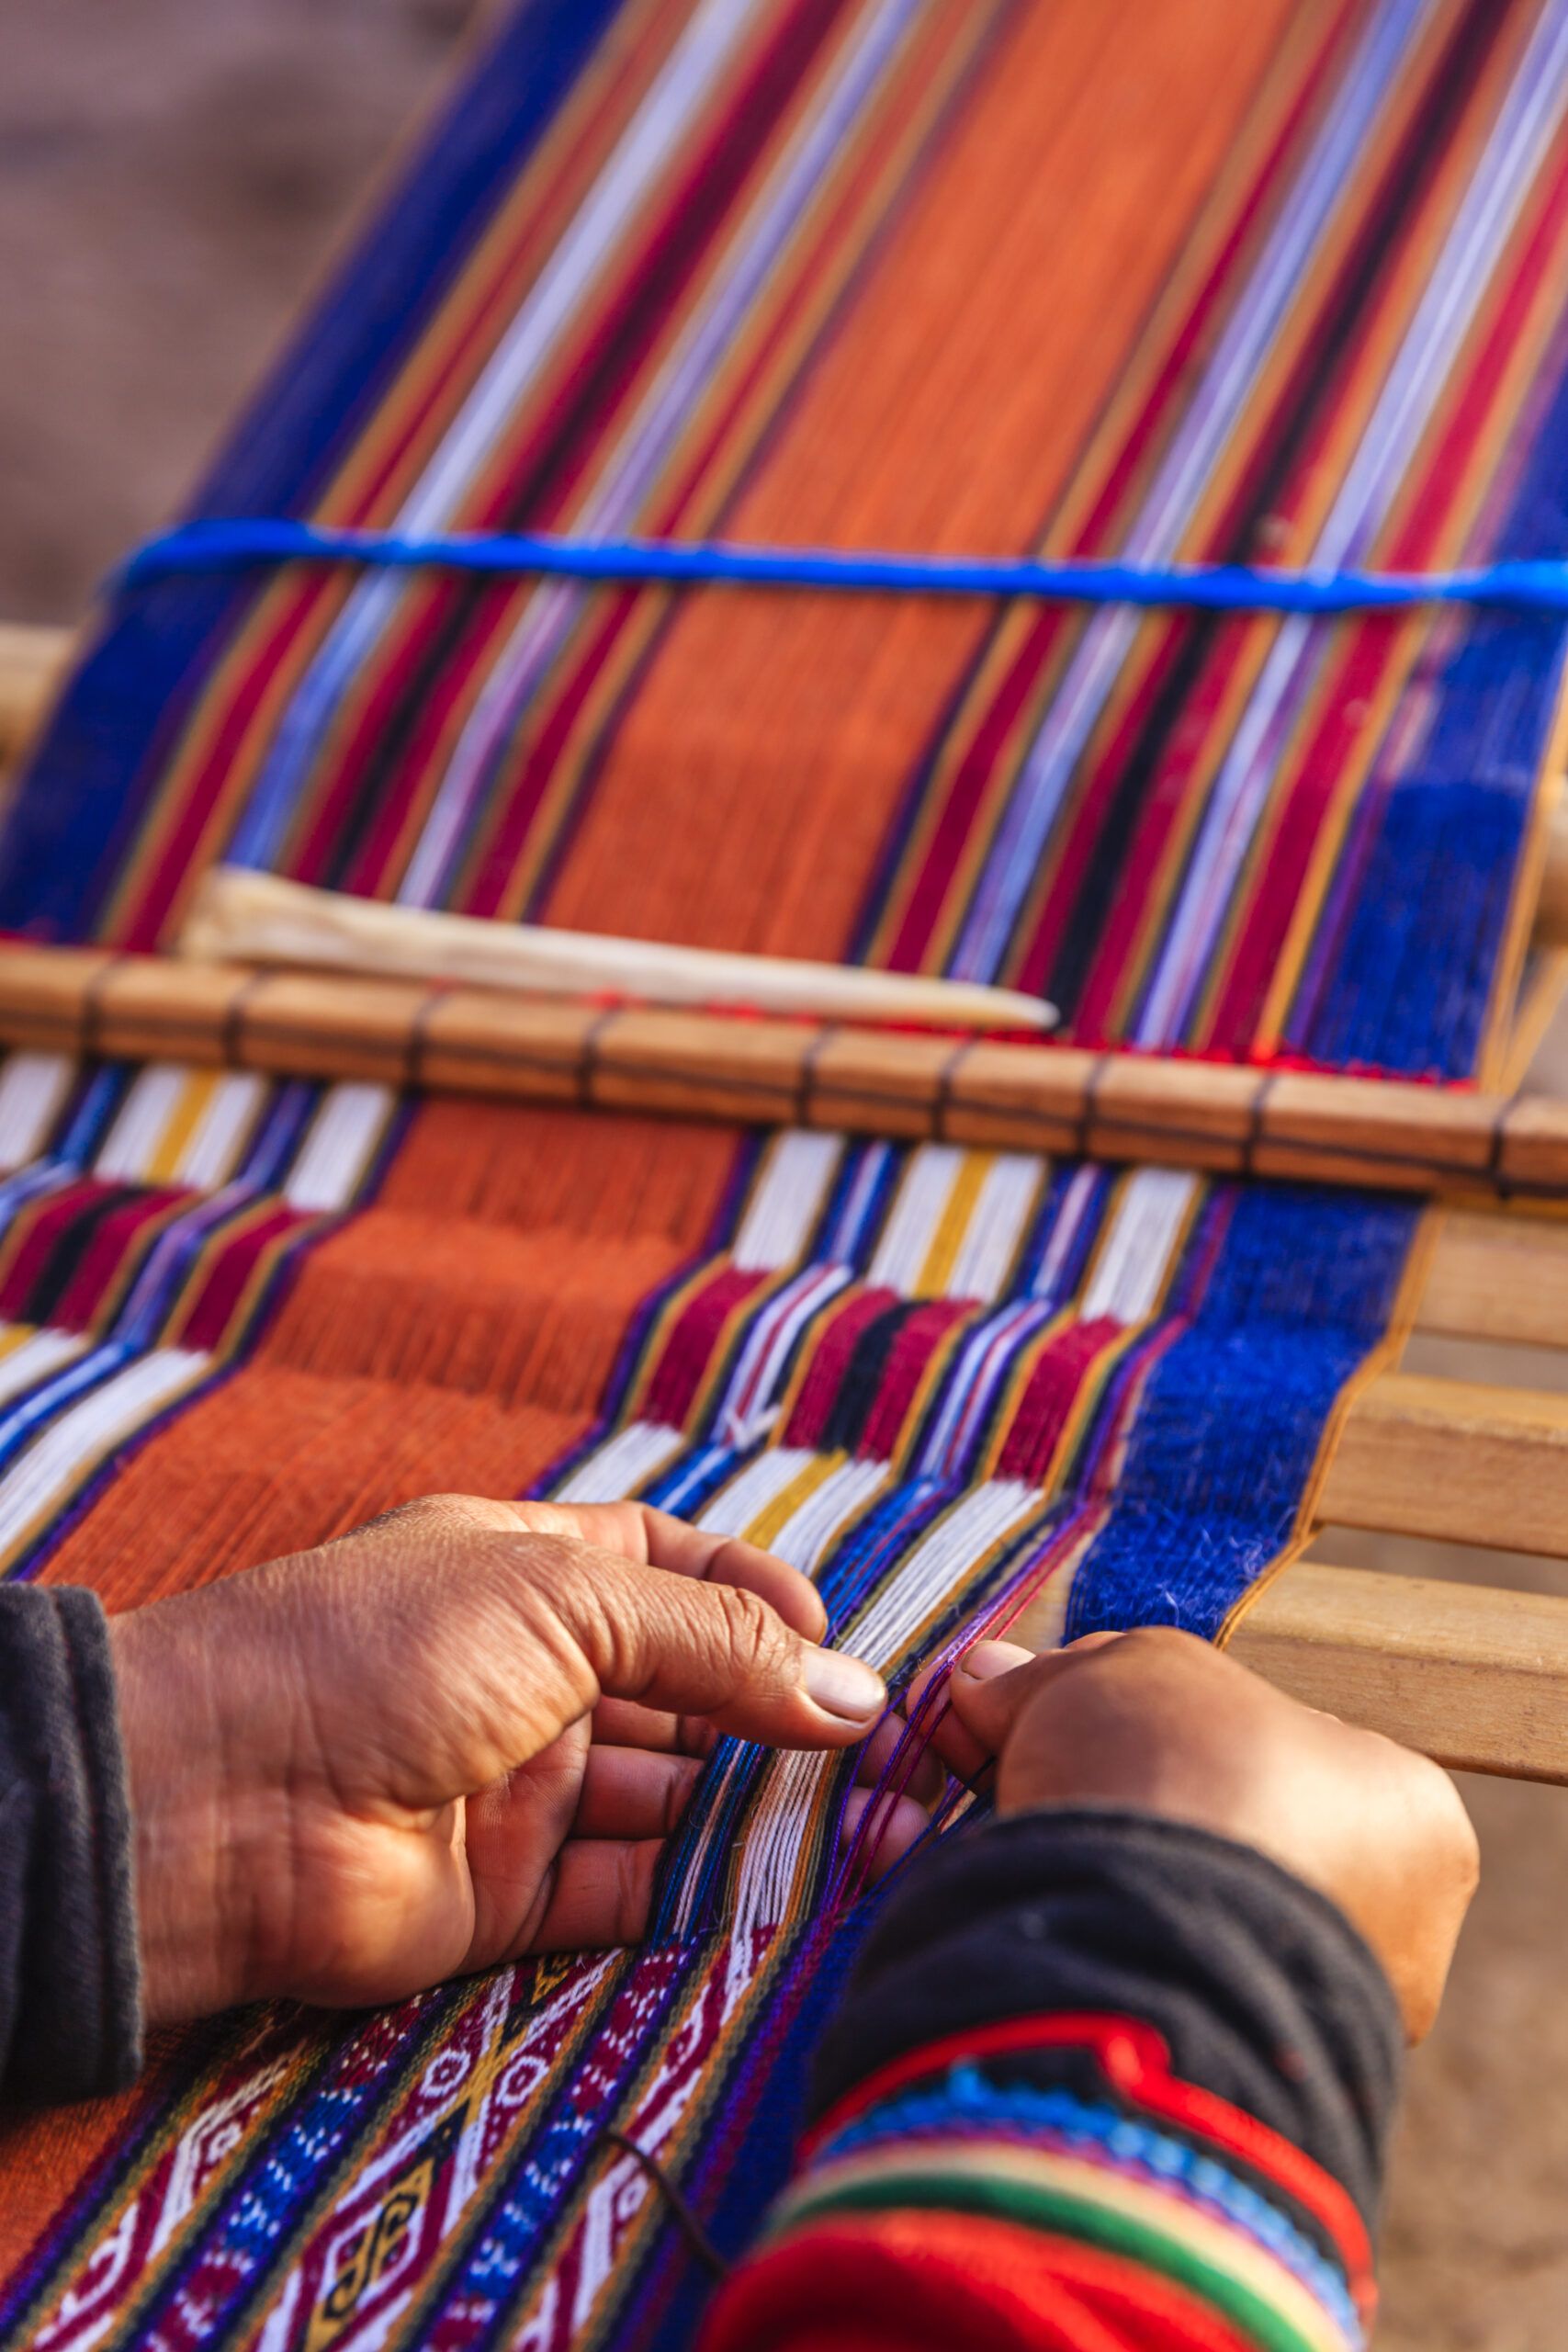 Hands weaving at a loom, with colorful fabric in the loom.